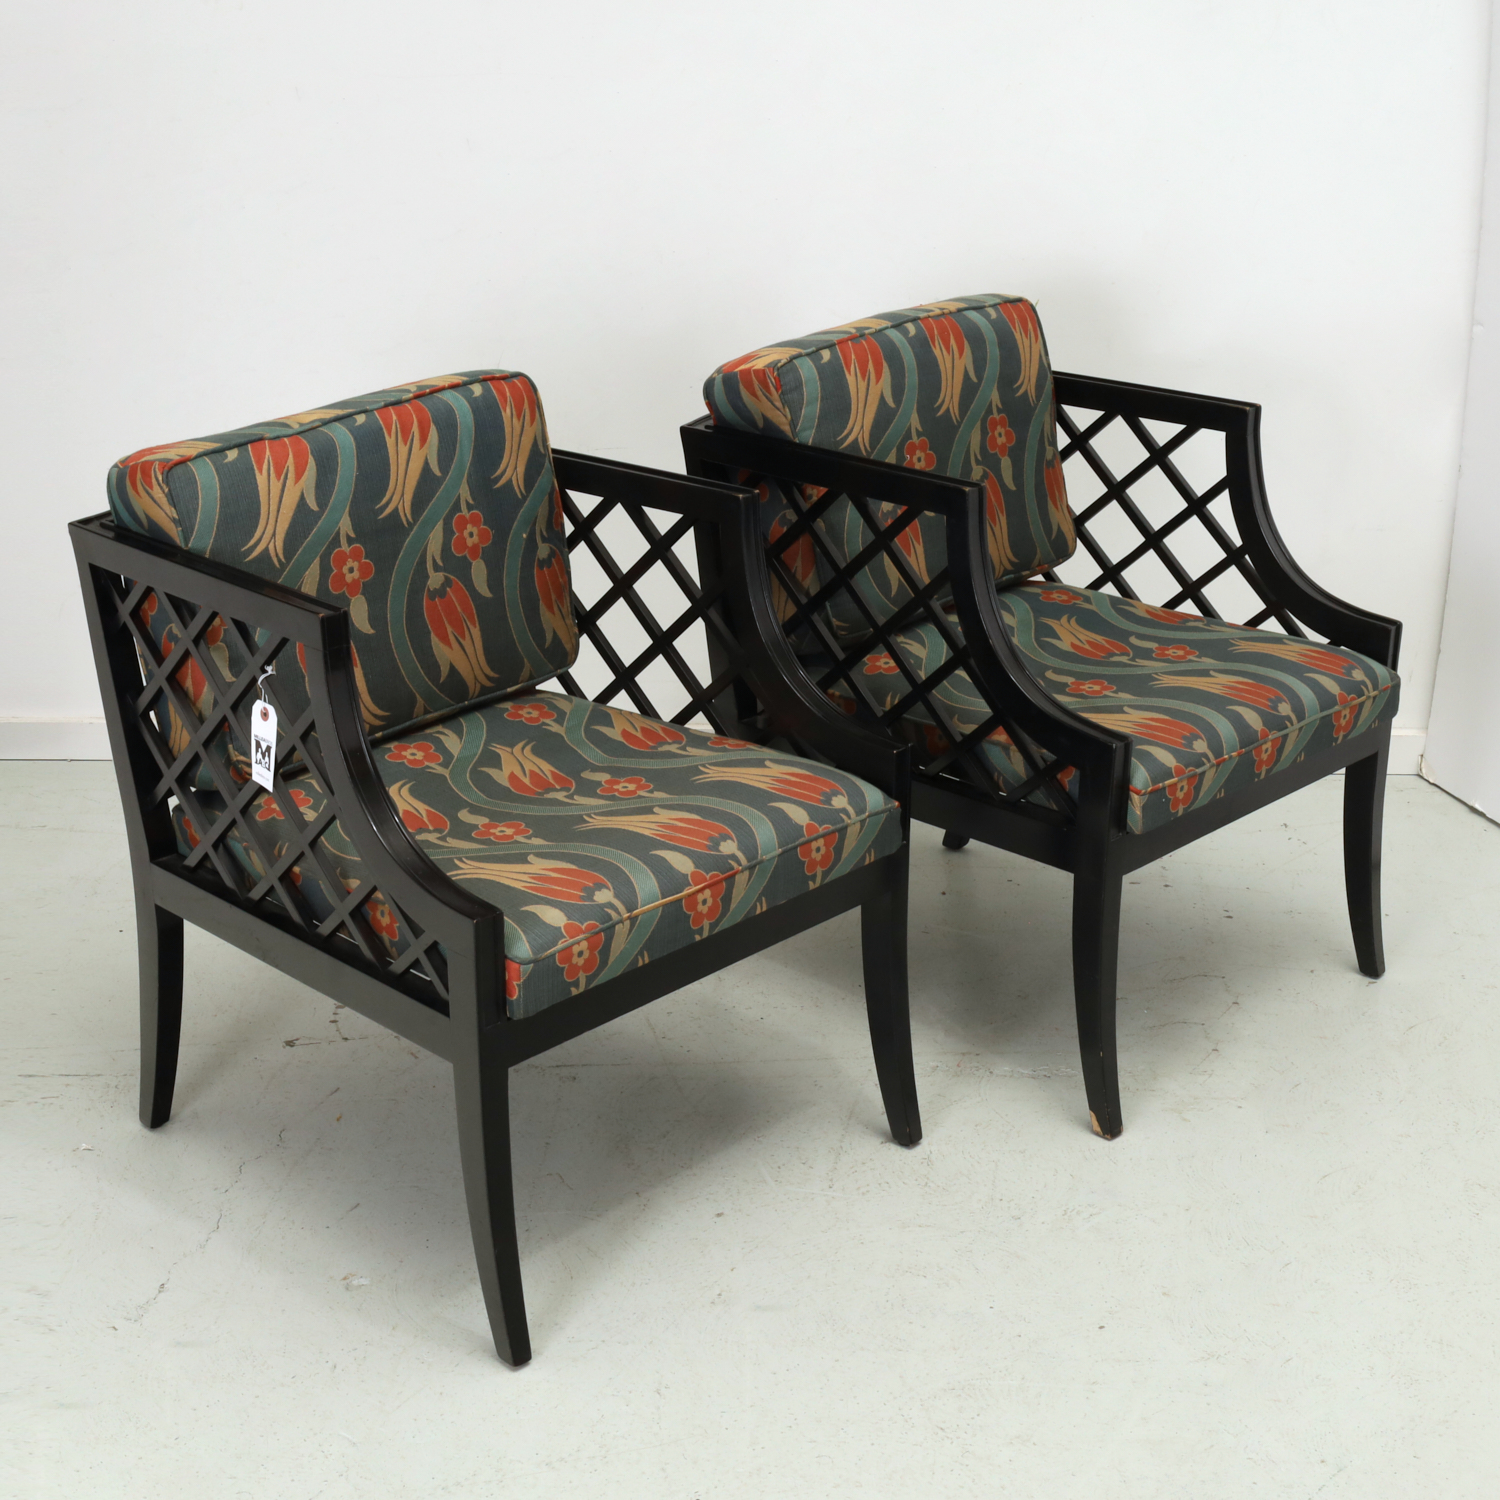 PAIR JAMES MONT STYLE LACQUERED